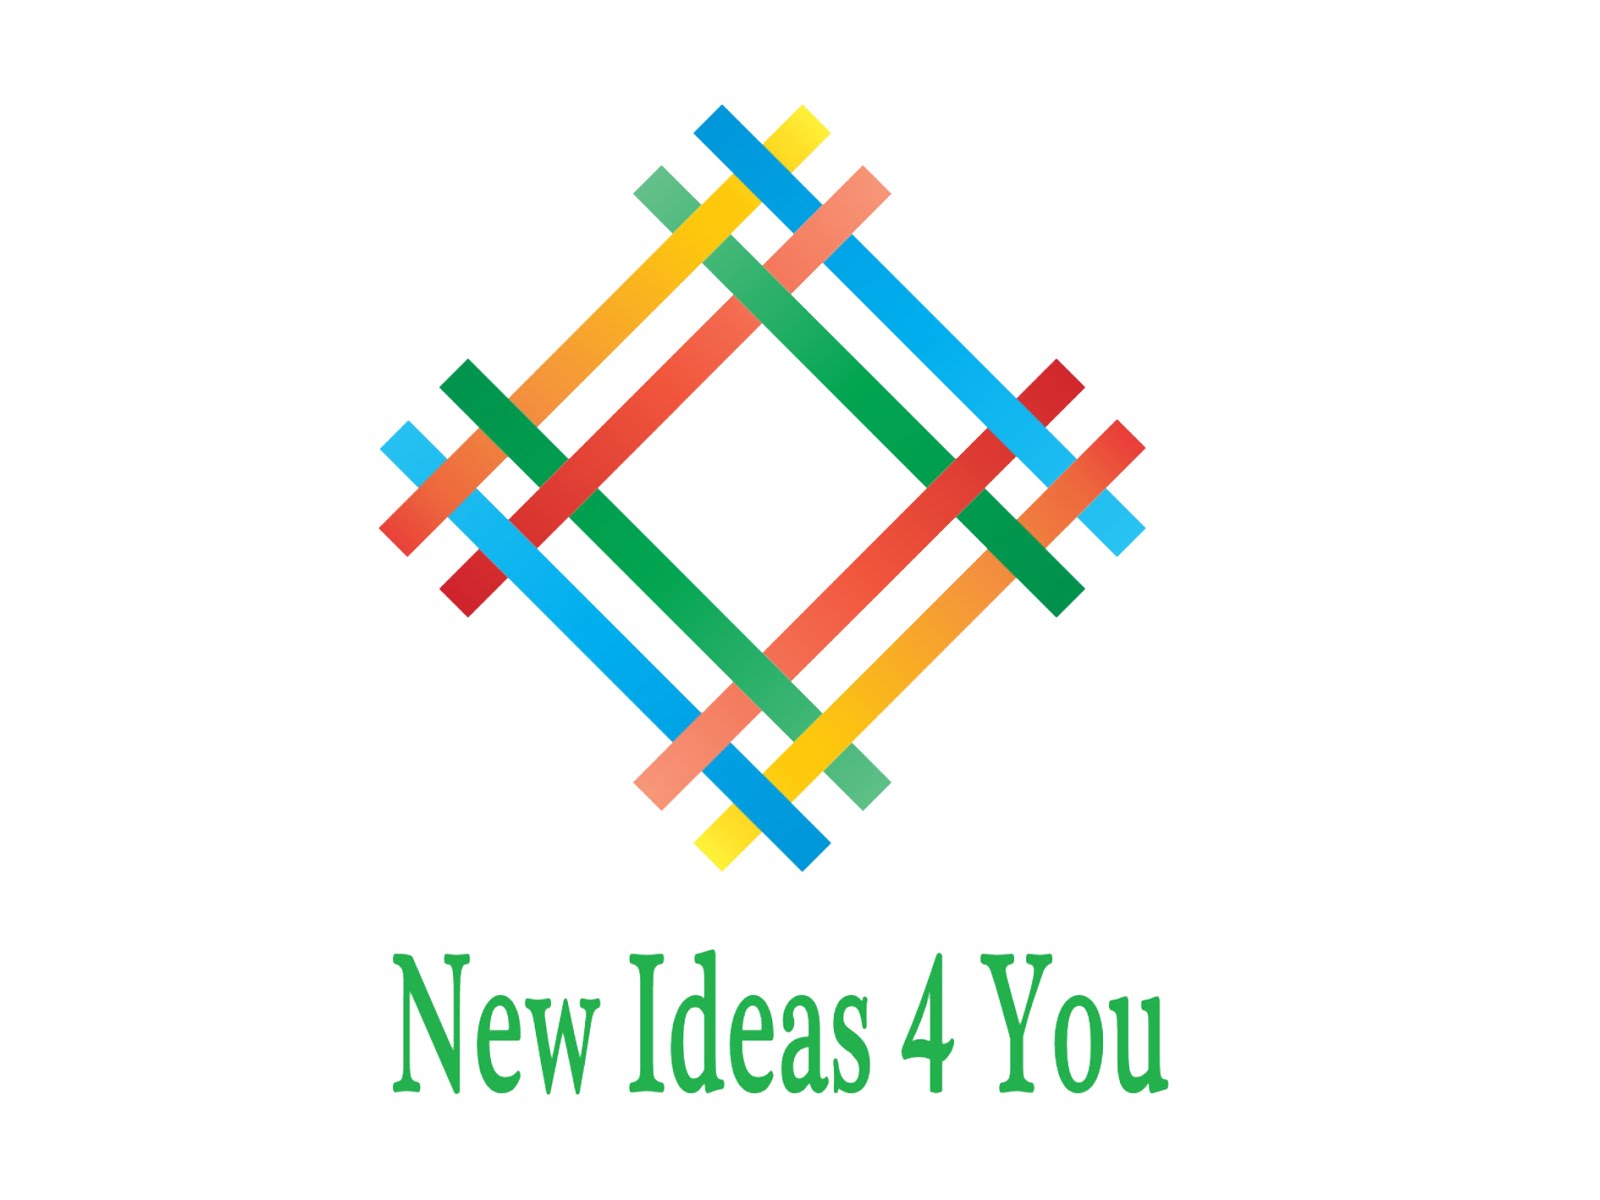 New Ideas 4 You